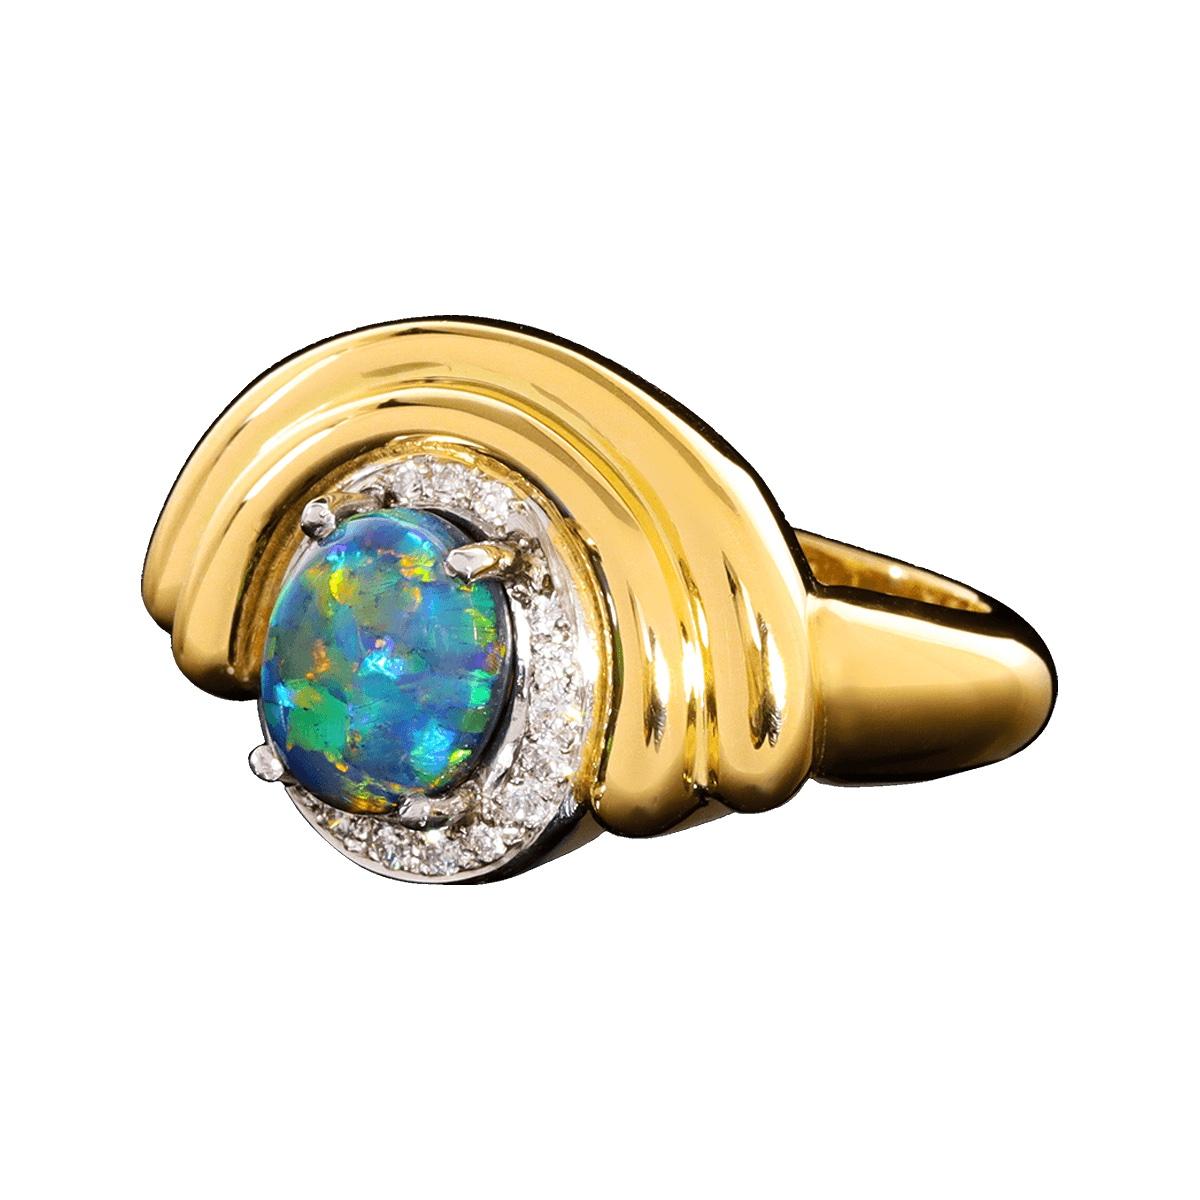 Art Deco is always in style. It represents symmetry and balance using geometry as its guide. Timeless beauty showcasing the magnificence of solid Australian Black Opal, sparkling white diamond surround, and a ring of solid 18K gold.

Master-crafted